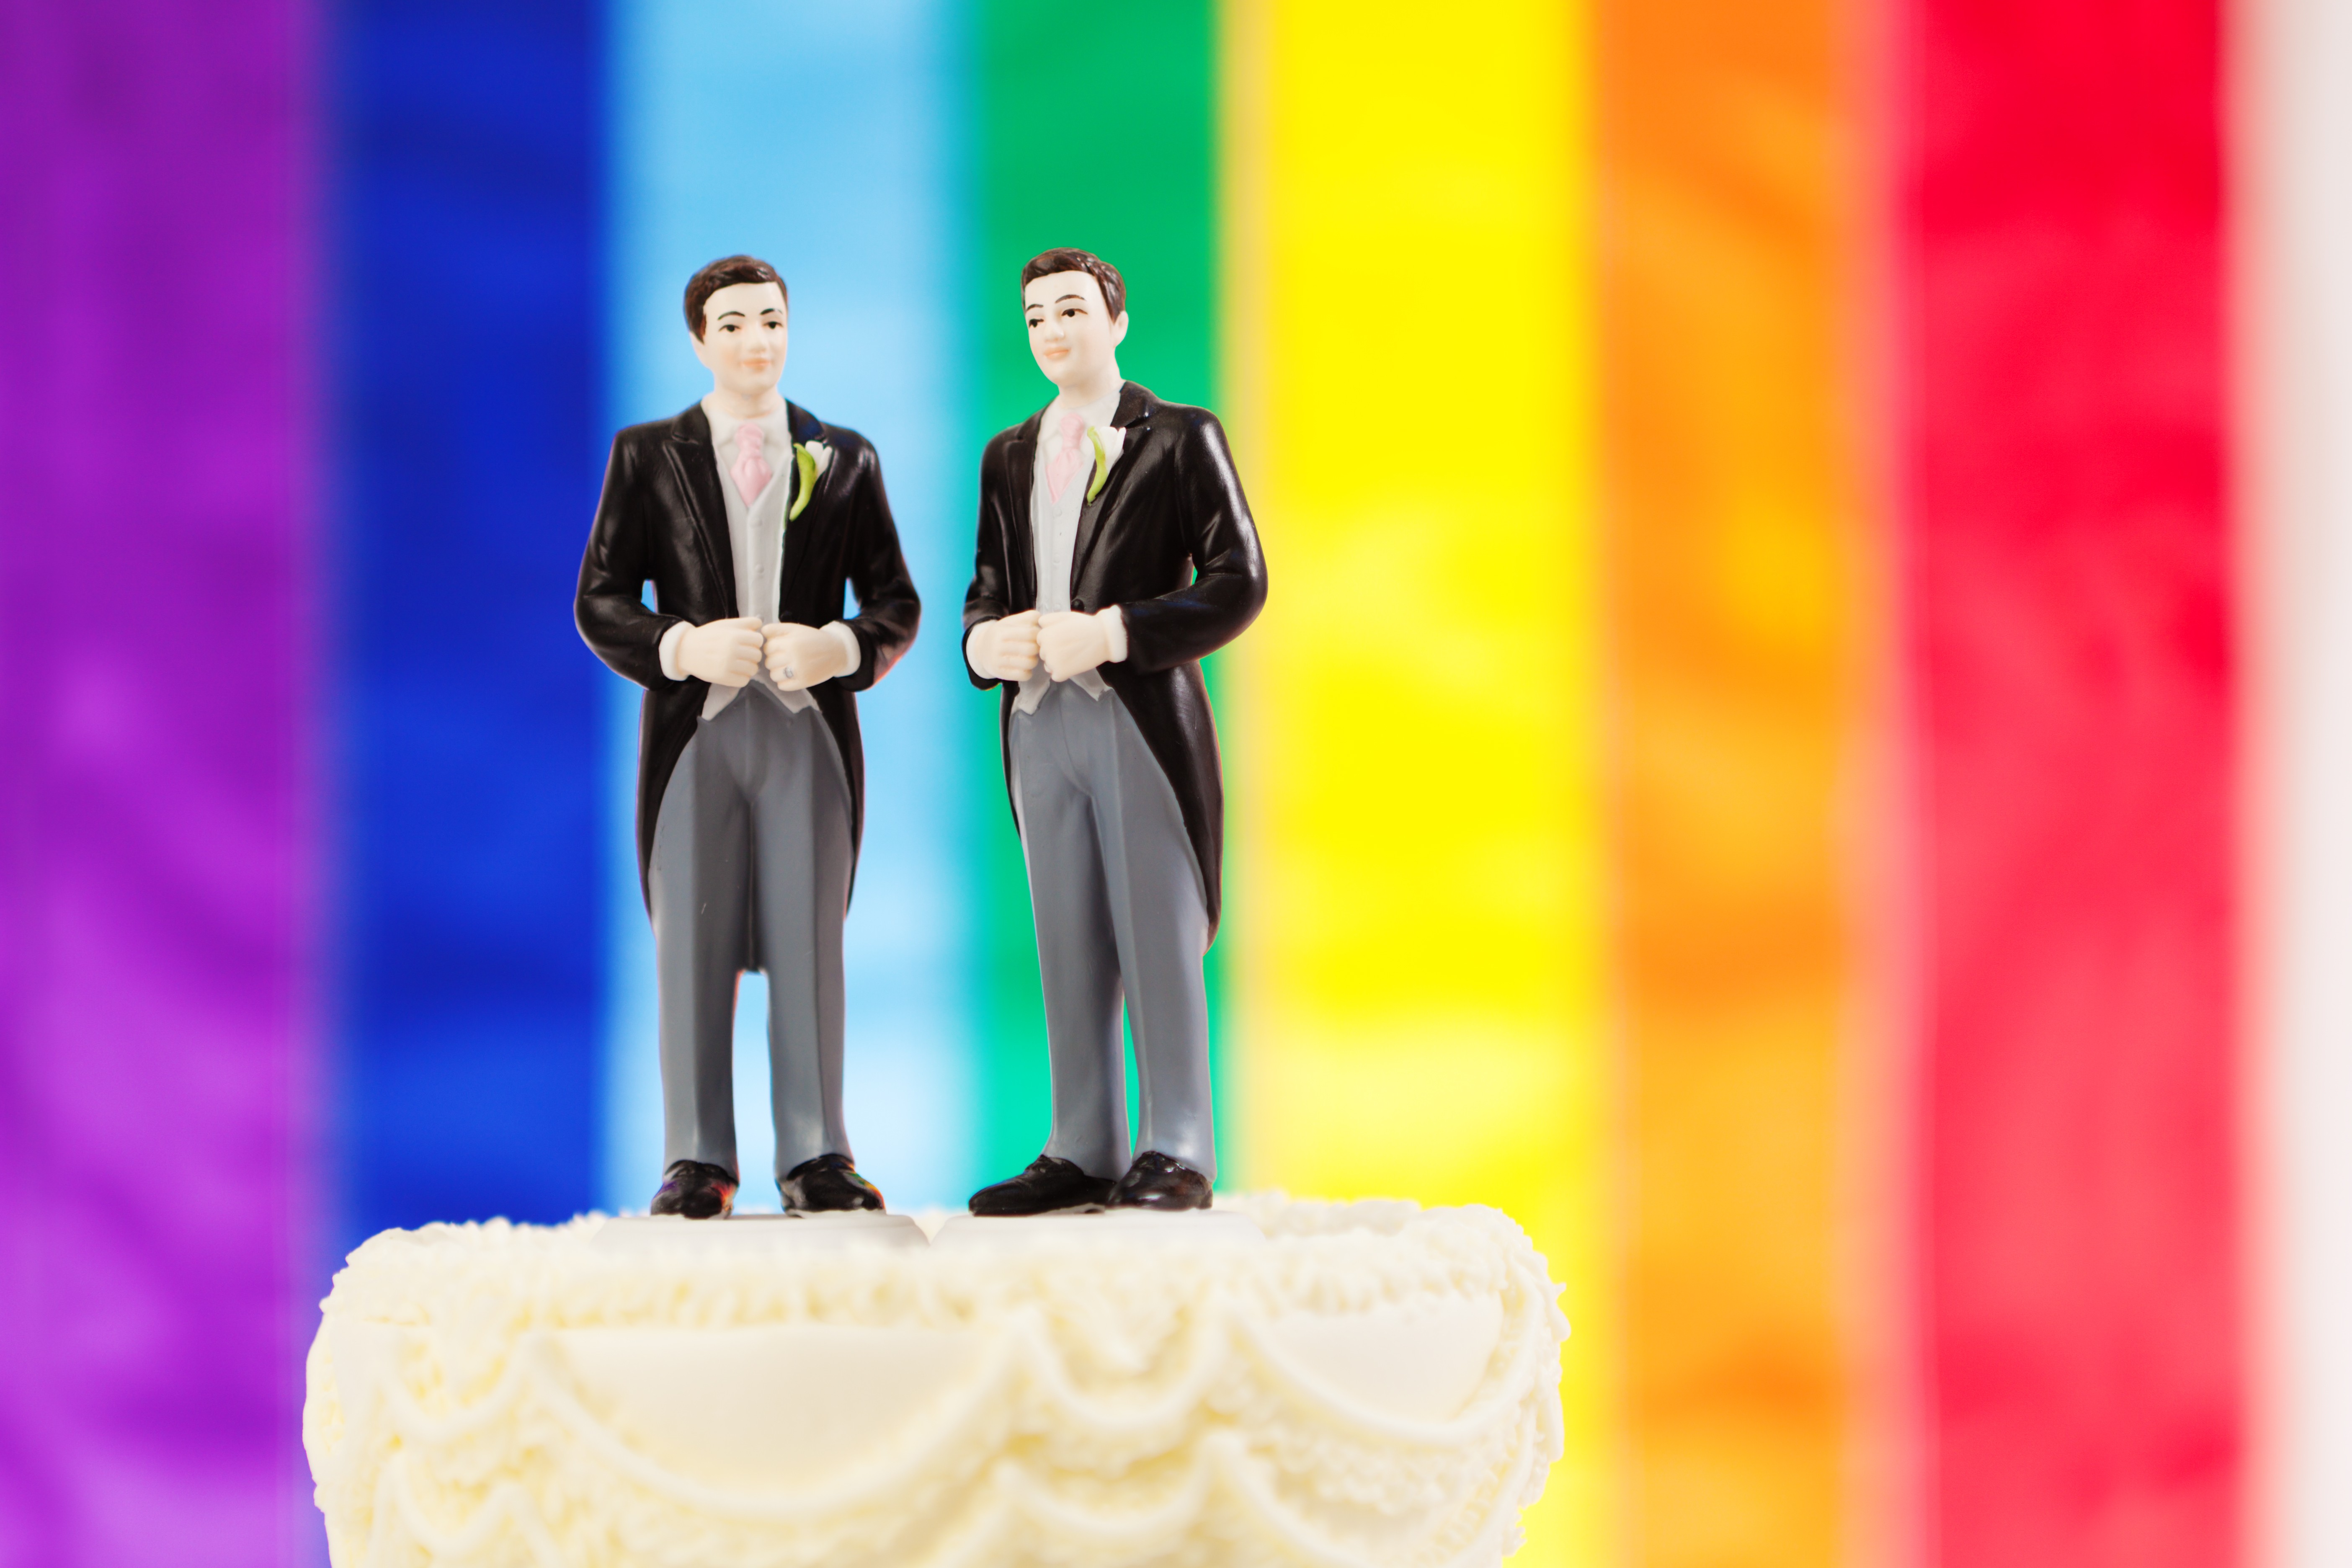 What are the important things to keep in mind when planning a same-sex wedding?